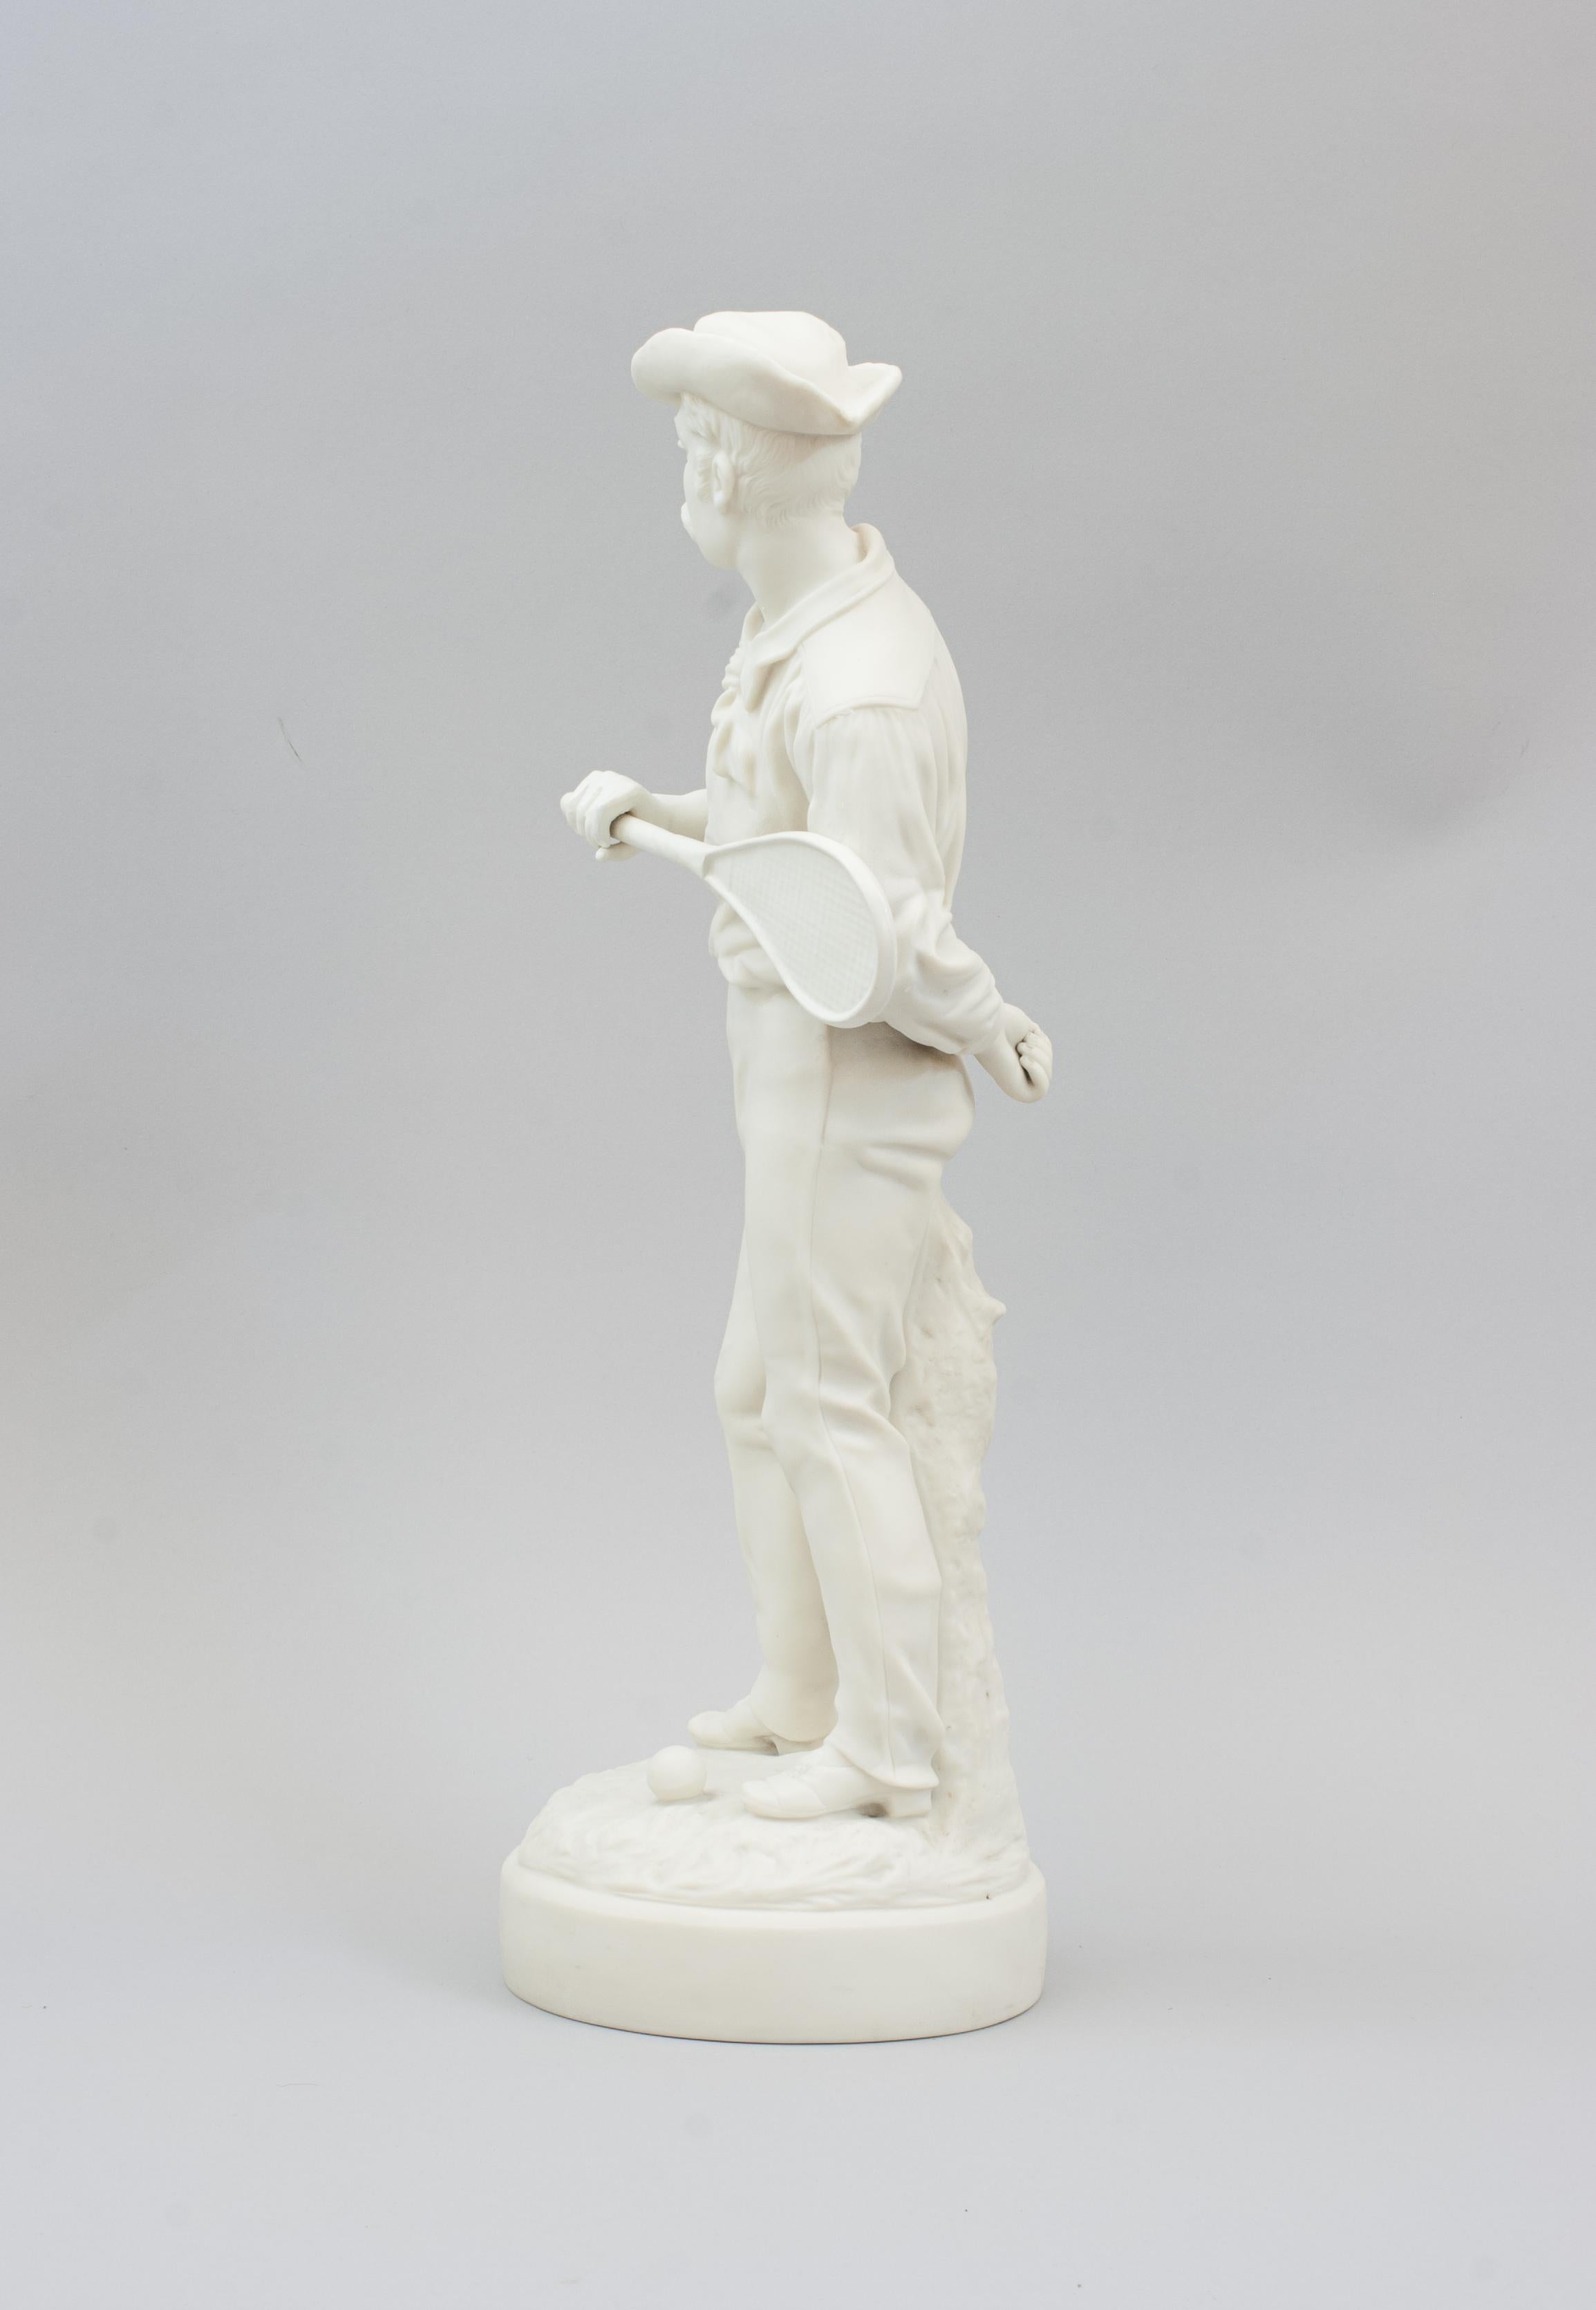 Lawn Tennis Sculpture.
Parian Ware Tennis Figure, James Ernest Renshaw.
An extremely rare, Parian Ware, Victorian tennis figurine by the sculptor Rowland James Morris. Signed and dated on the base 'R.J. Morris 1884'. The gentleman can be seen